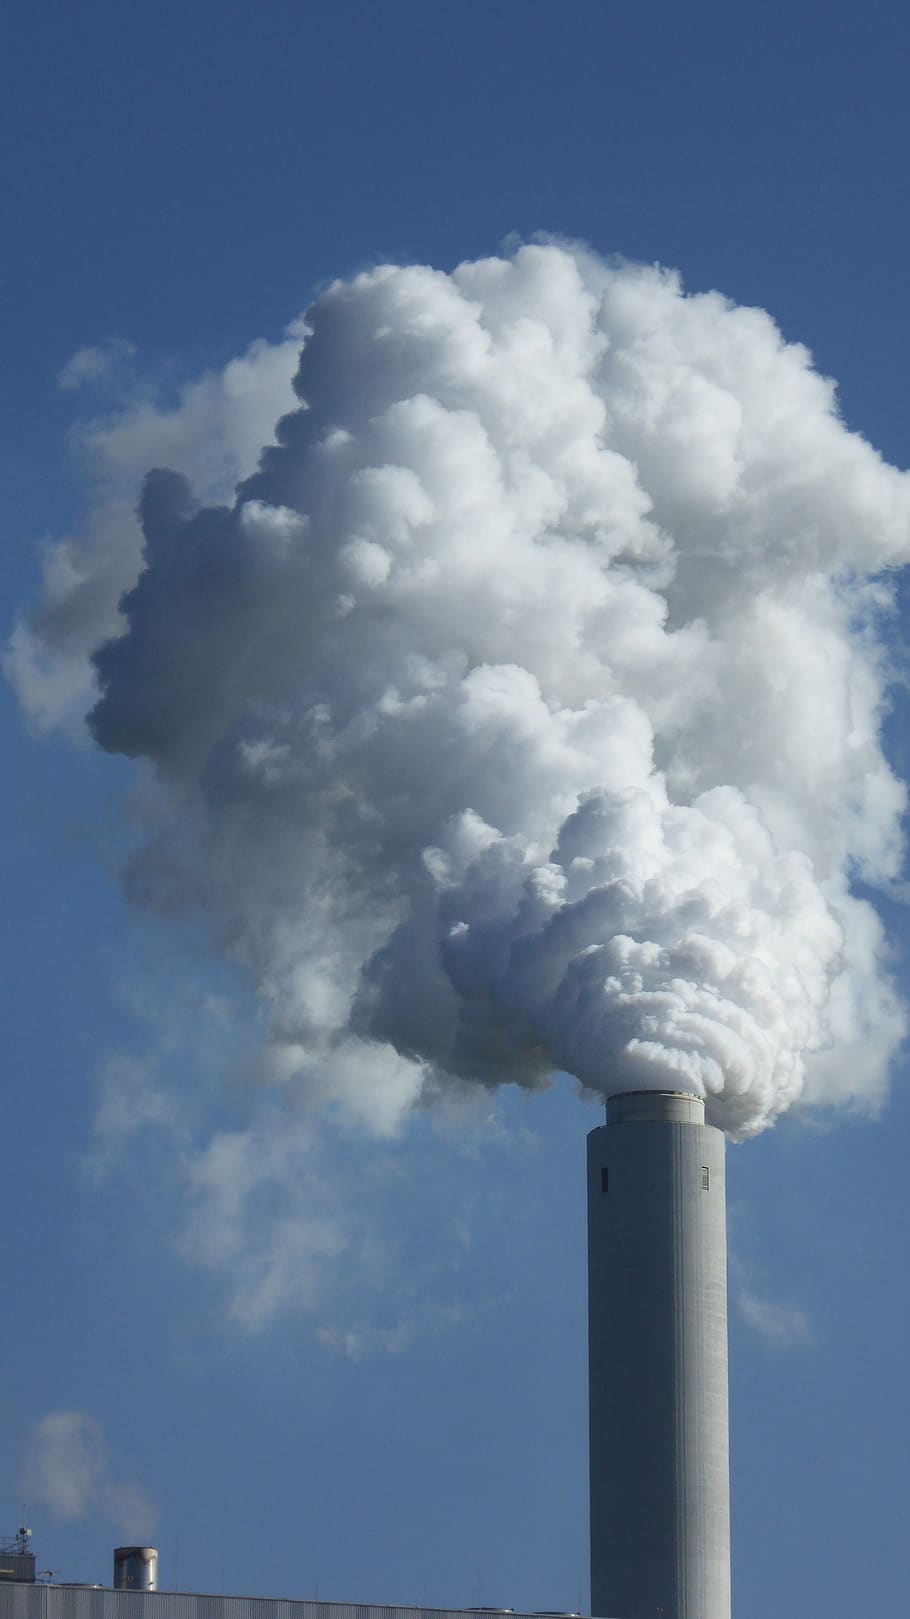 emissions, steam, smoke, chimney, fireplace, environment, smog, pollution, industry, climate